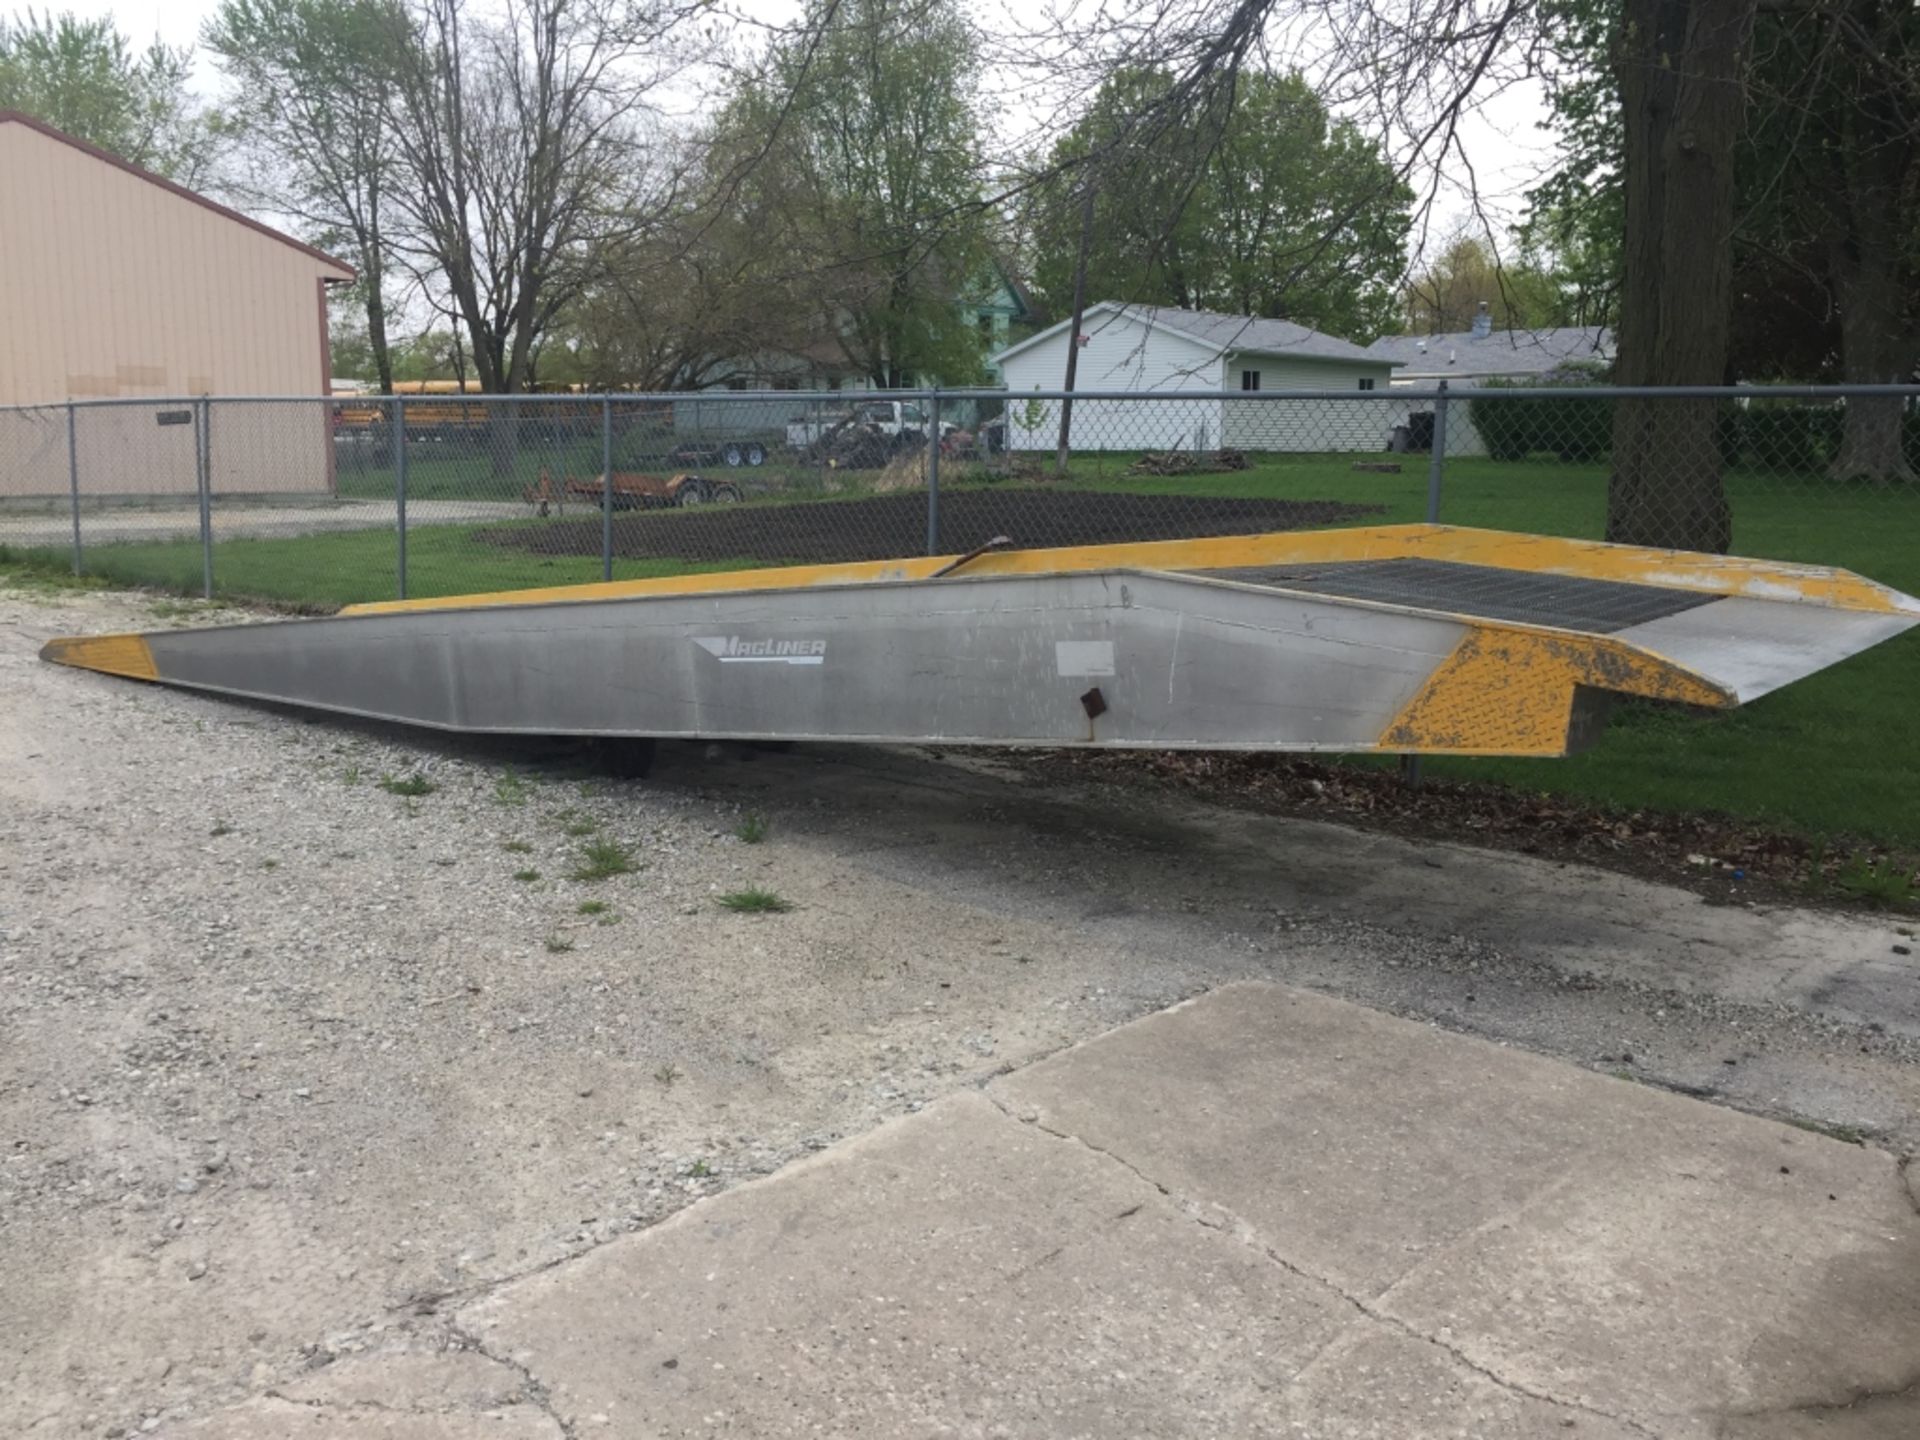 Magliner Mobile-Dock II Moveable Ramp, 36' x 7', Located in Mt. Pleasant, IA